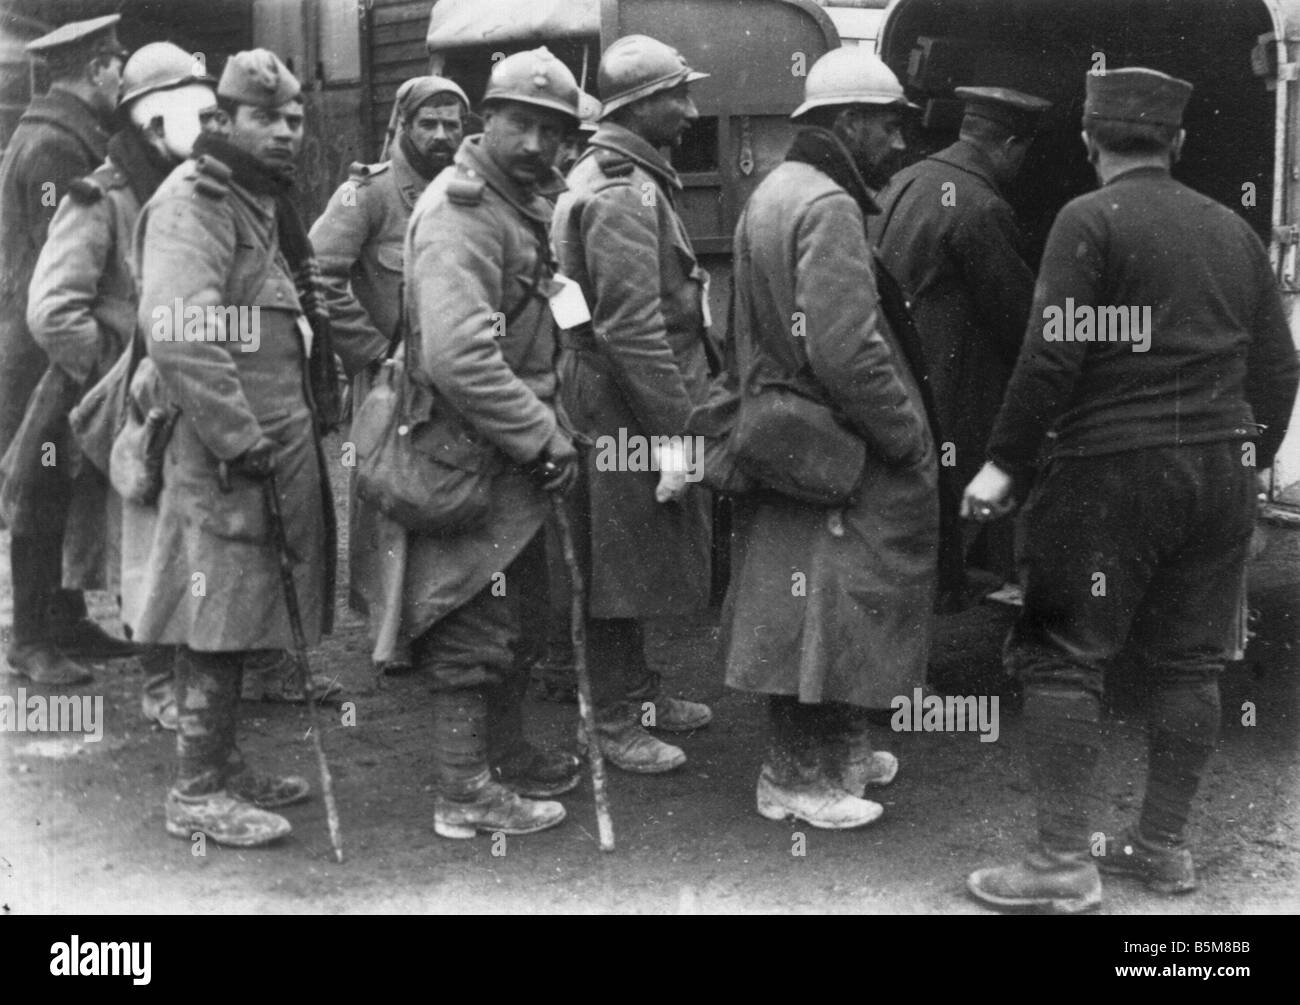 2 G55 F1 1915 7 French troops board an ambulance 1915 History World War I France Wounded French soldiers climb onto an ambulance Stock Photo